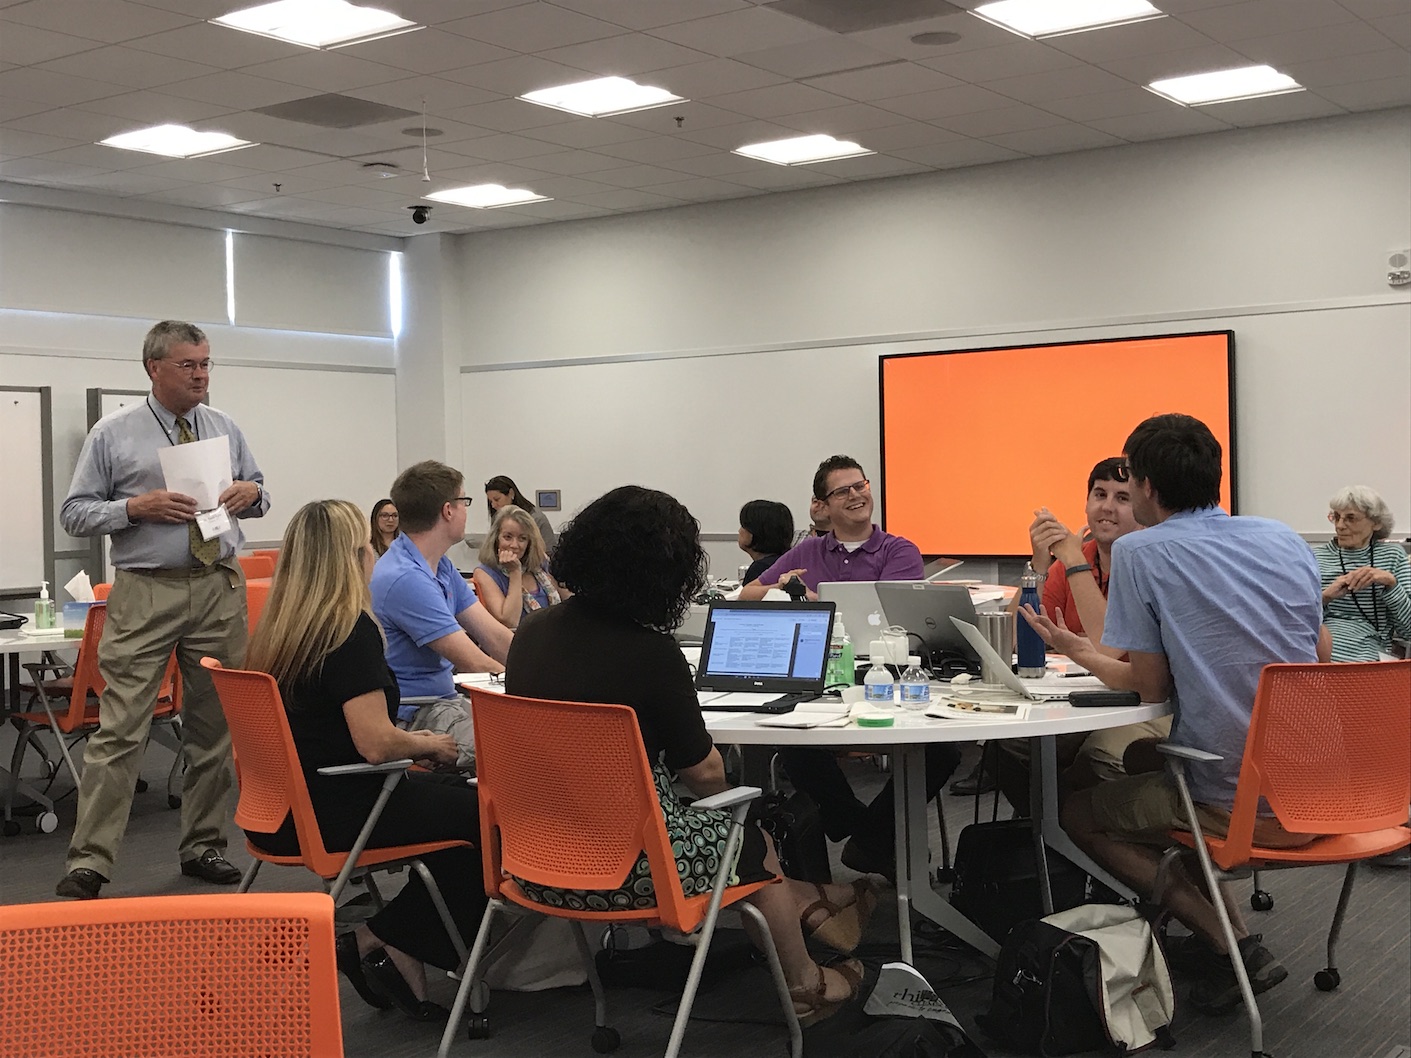 David Knox leads group critical thinking exercise at the Faculty Institute 2017